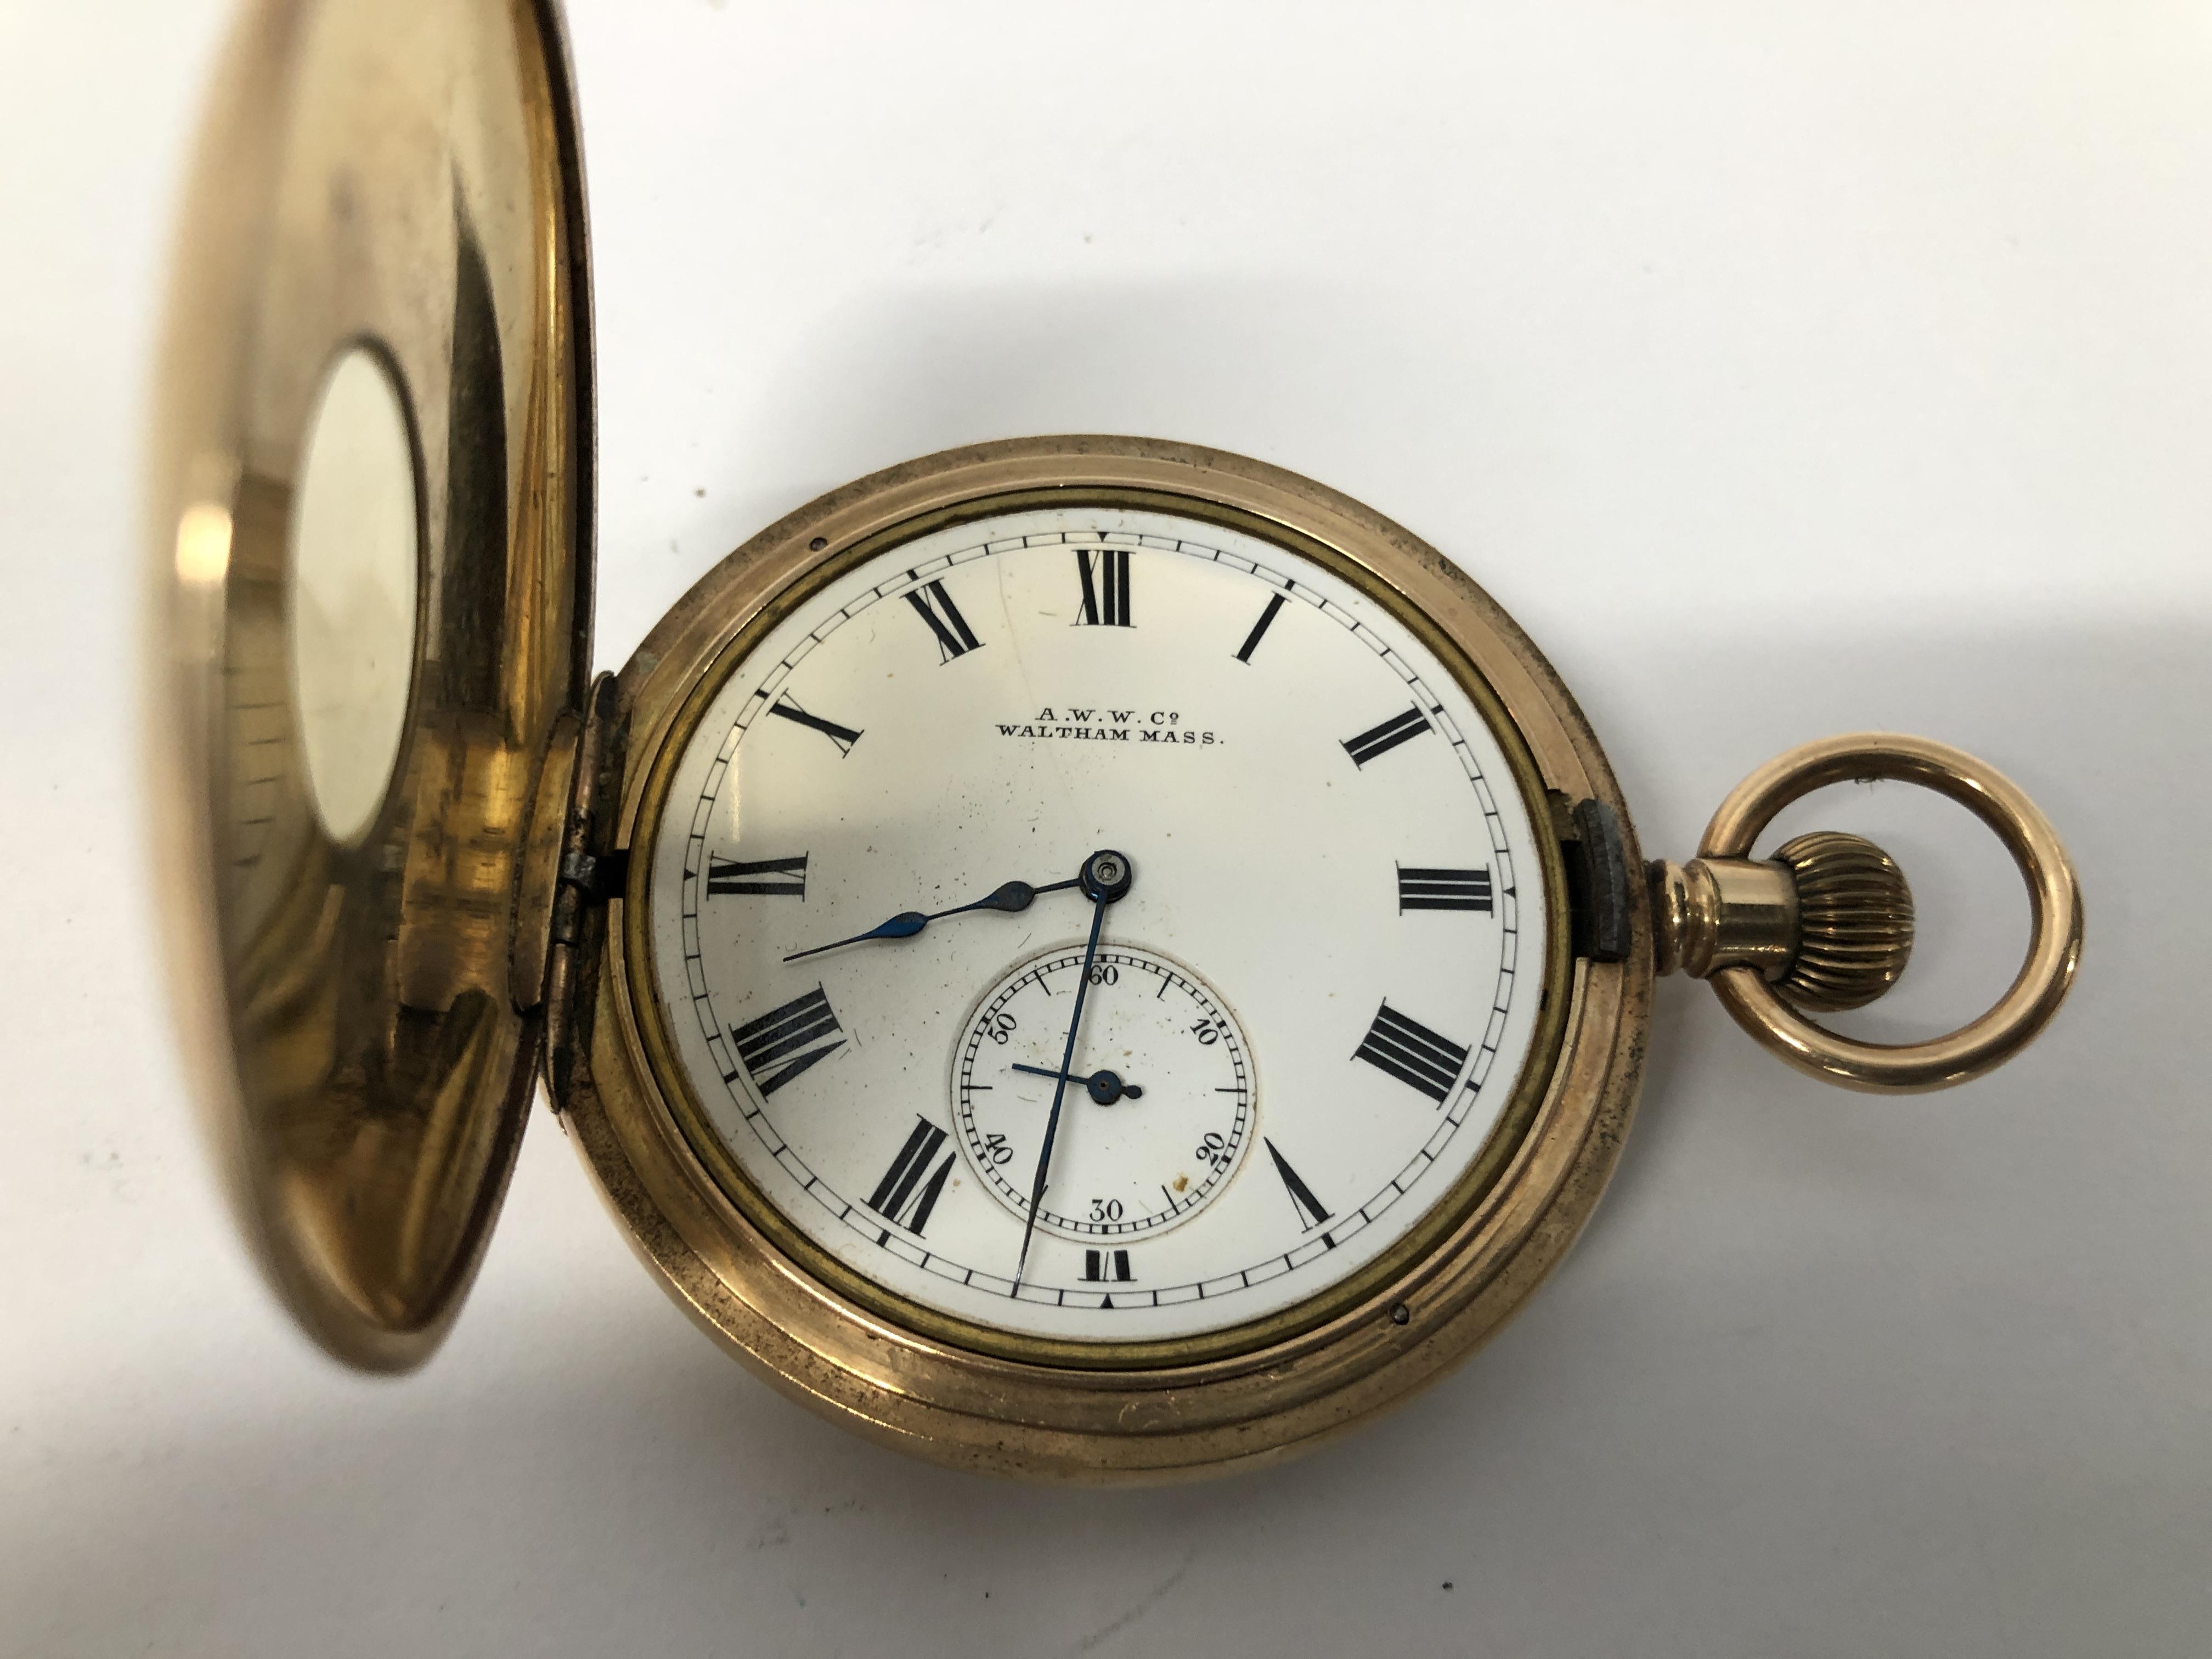 A VINTAGE GOLD PLATED "WALTHAM MASS" POCKET WATCH WITH ENAMELLED DIAL - Image 5 of 8